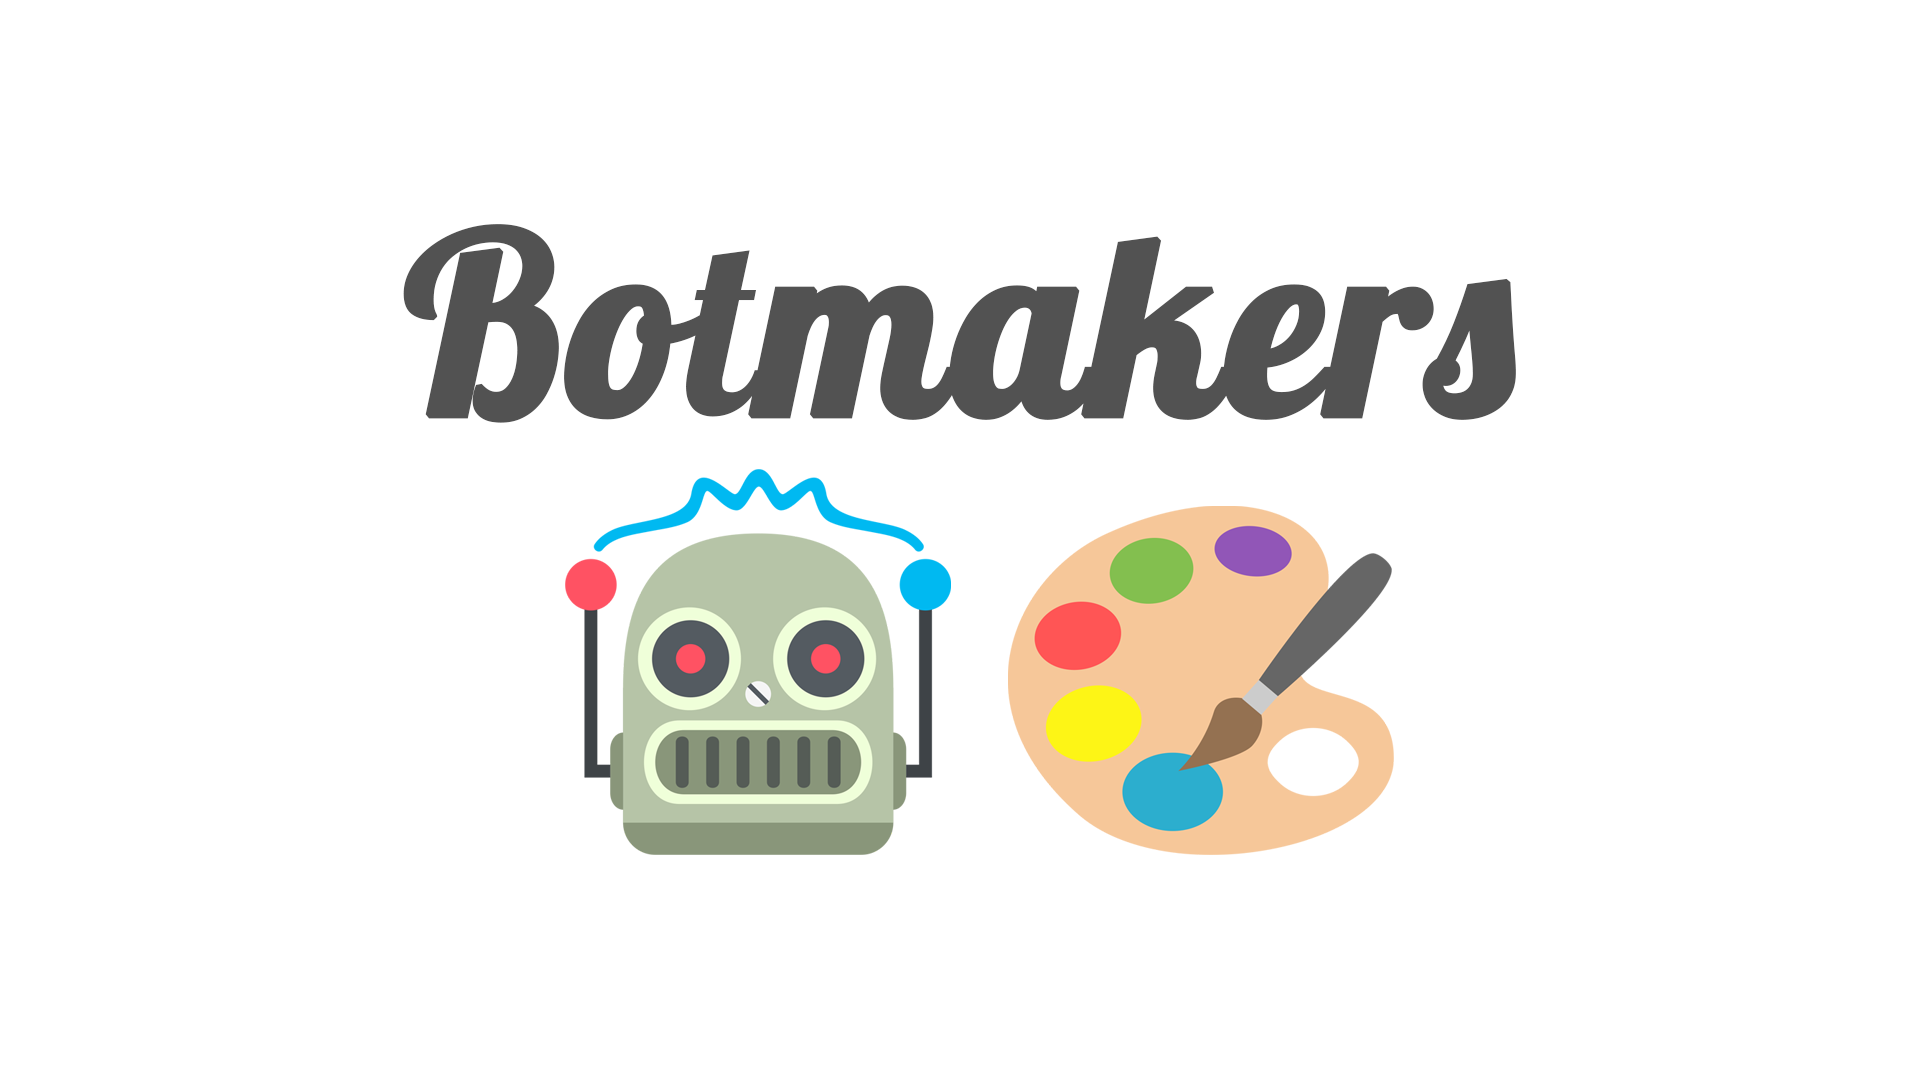 Join Botmakers!